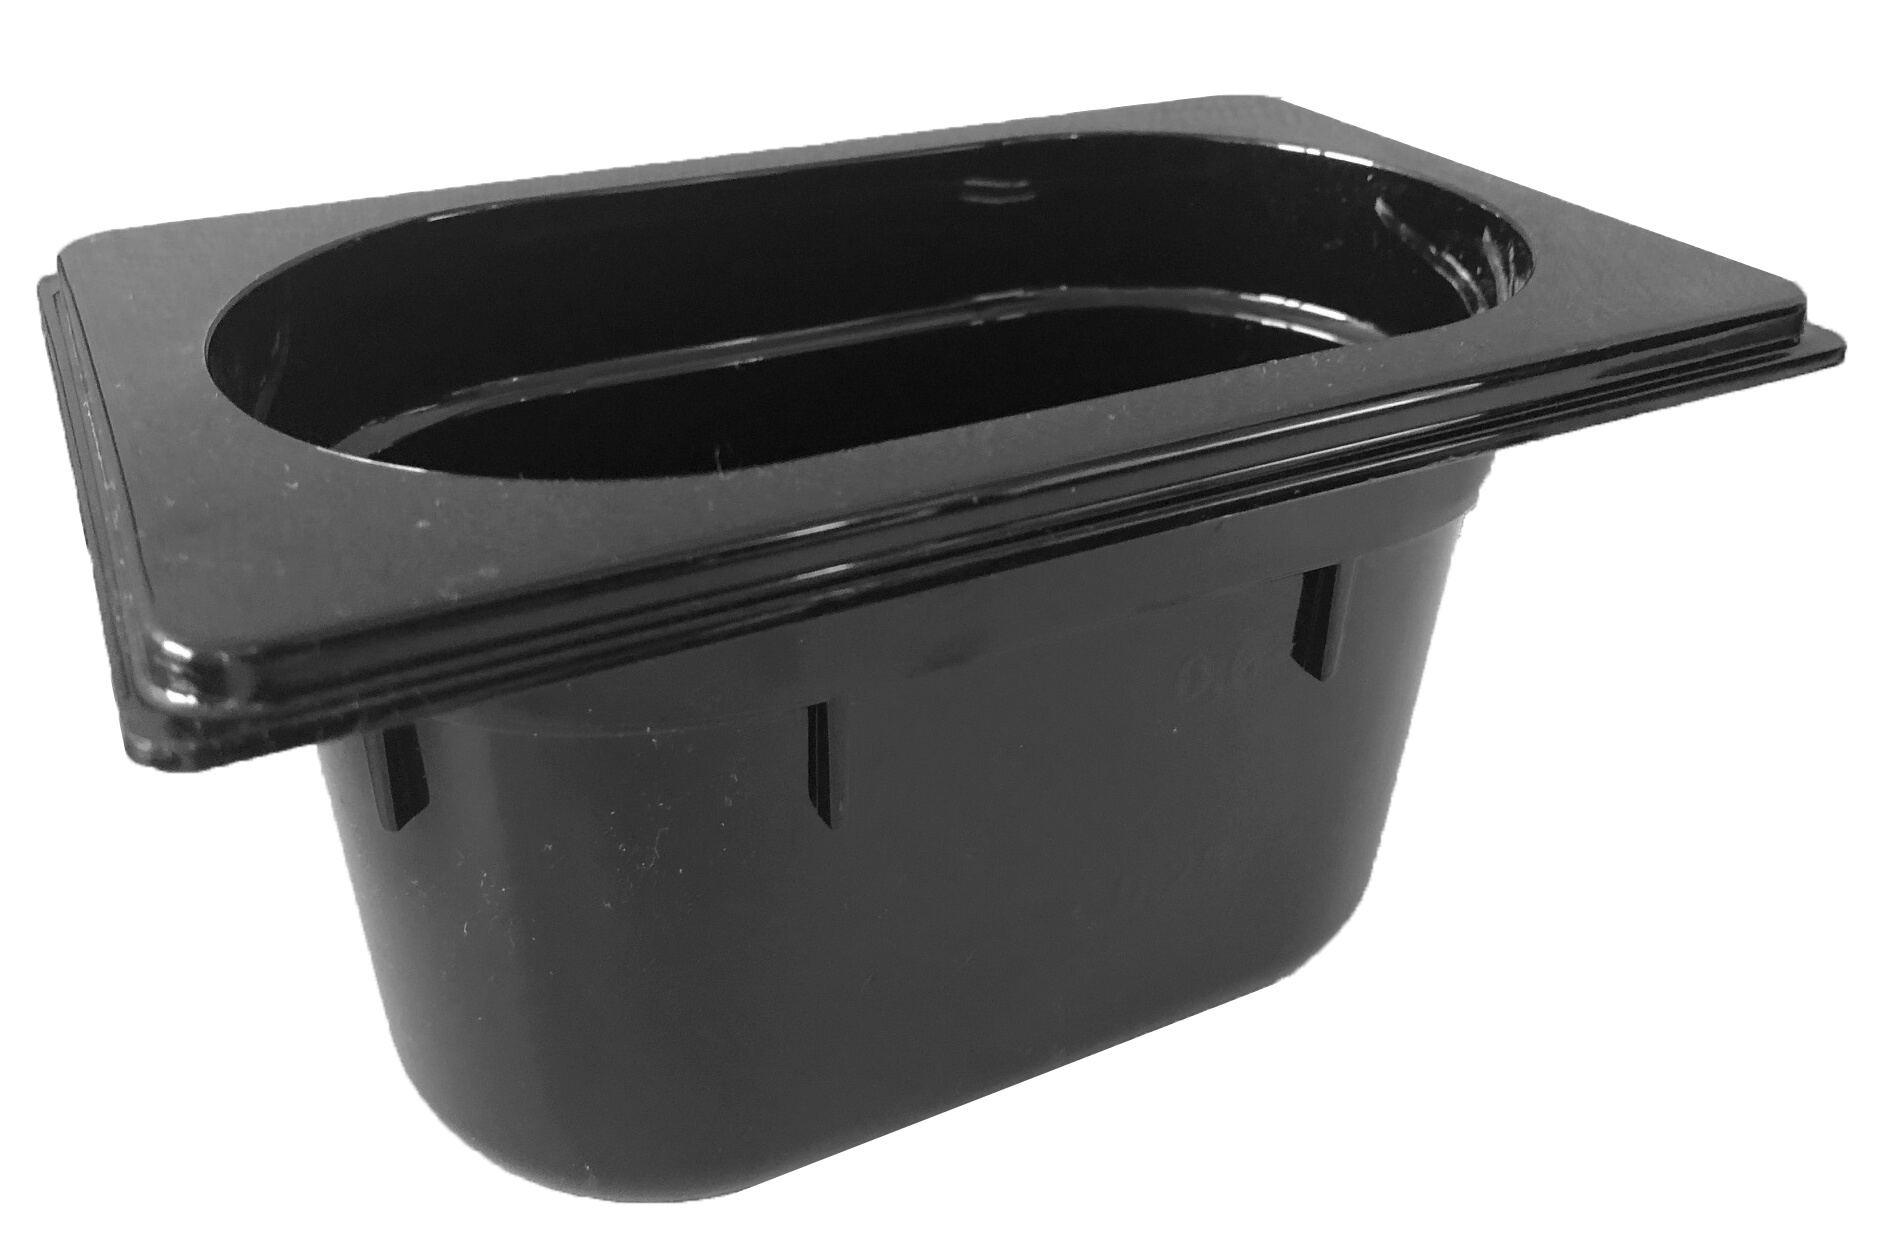 Gastronomy-standard container 100mm depth - plastic (GN 1/9)